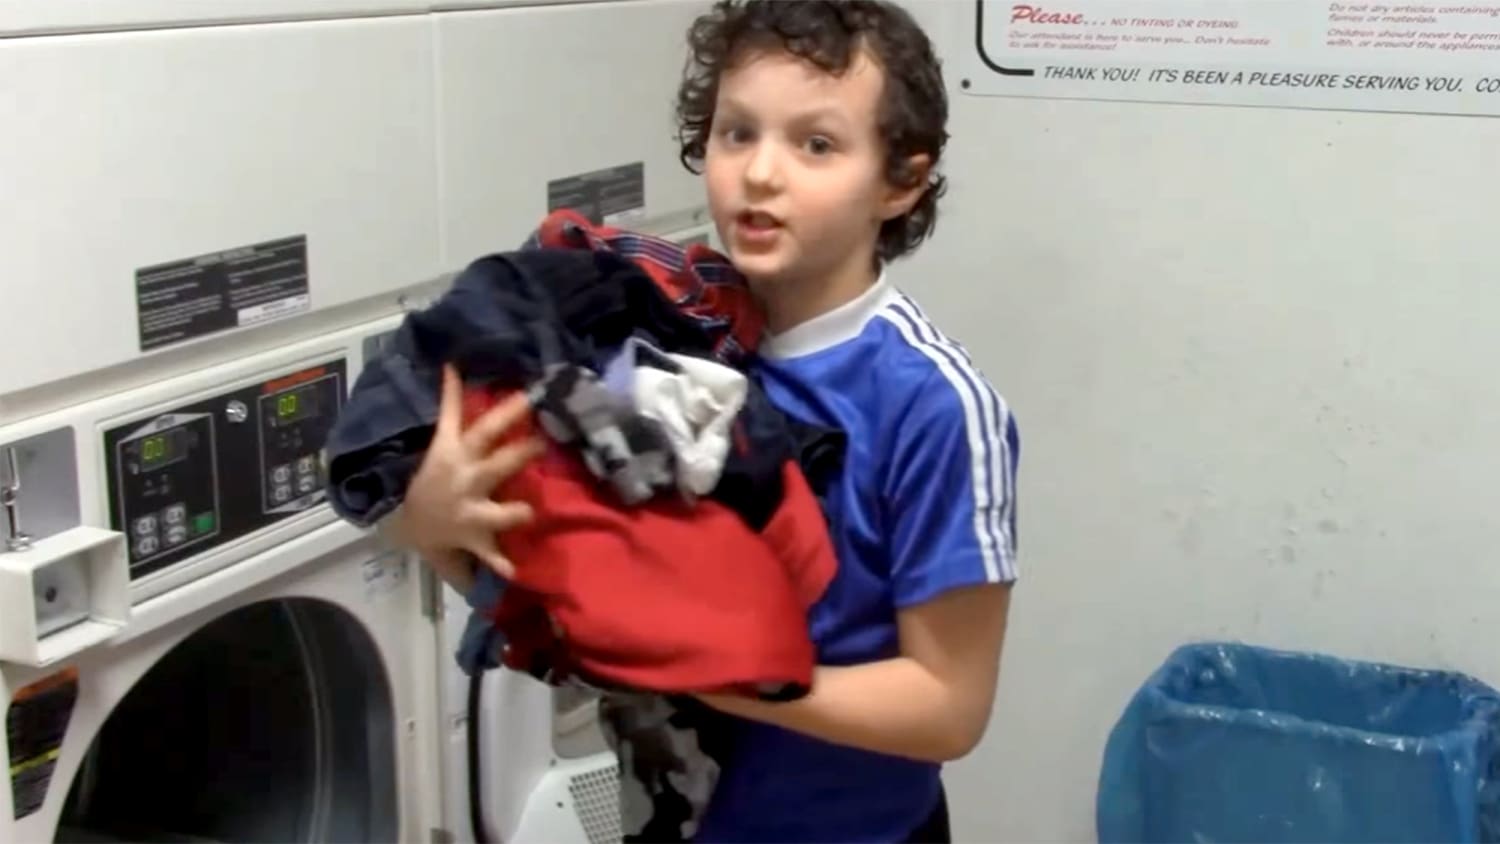 8-year-olds can do laundry: Which chores at what ages? - TODAY.com